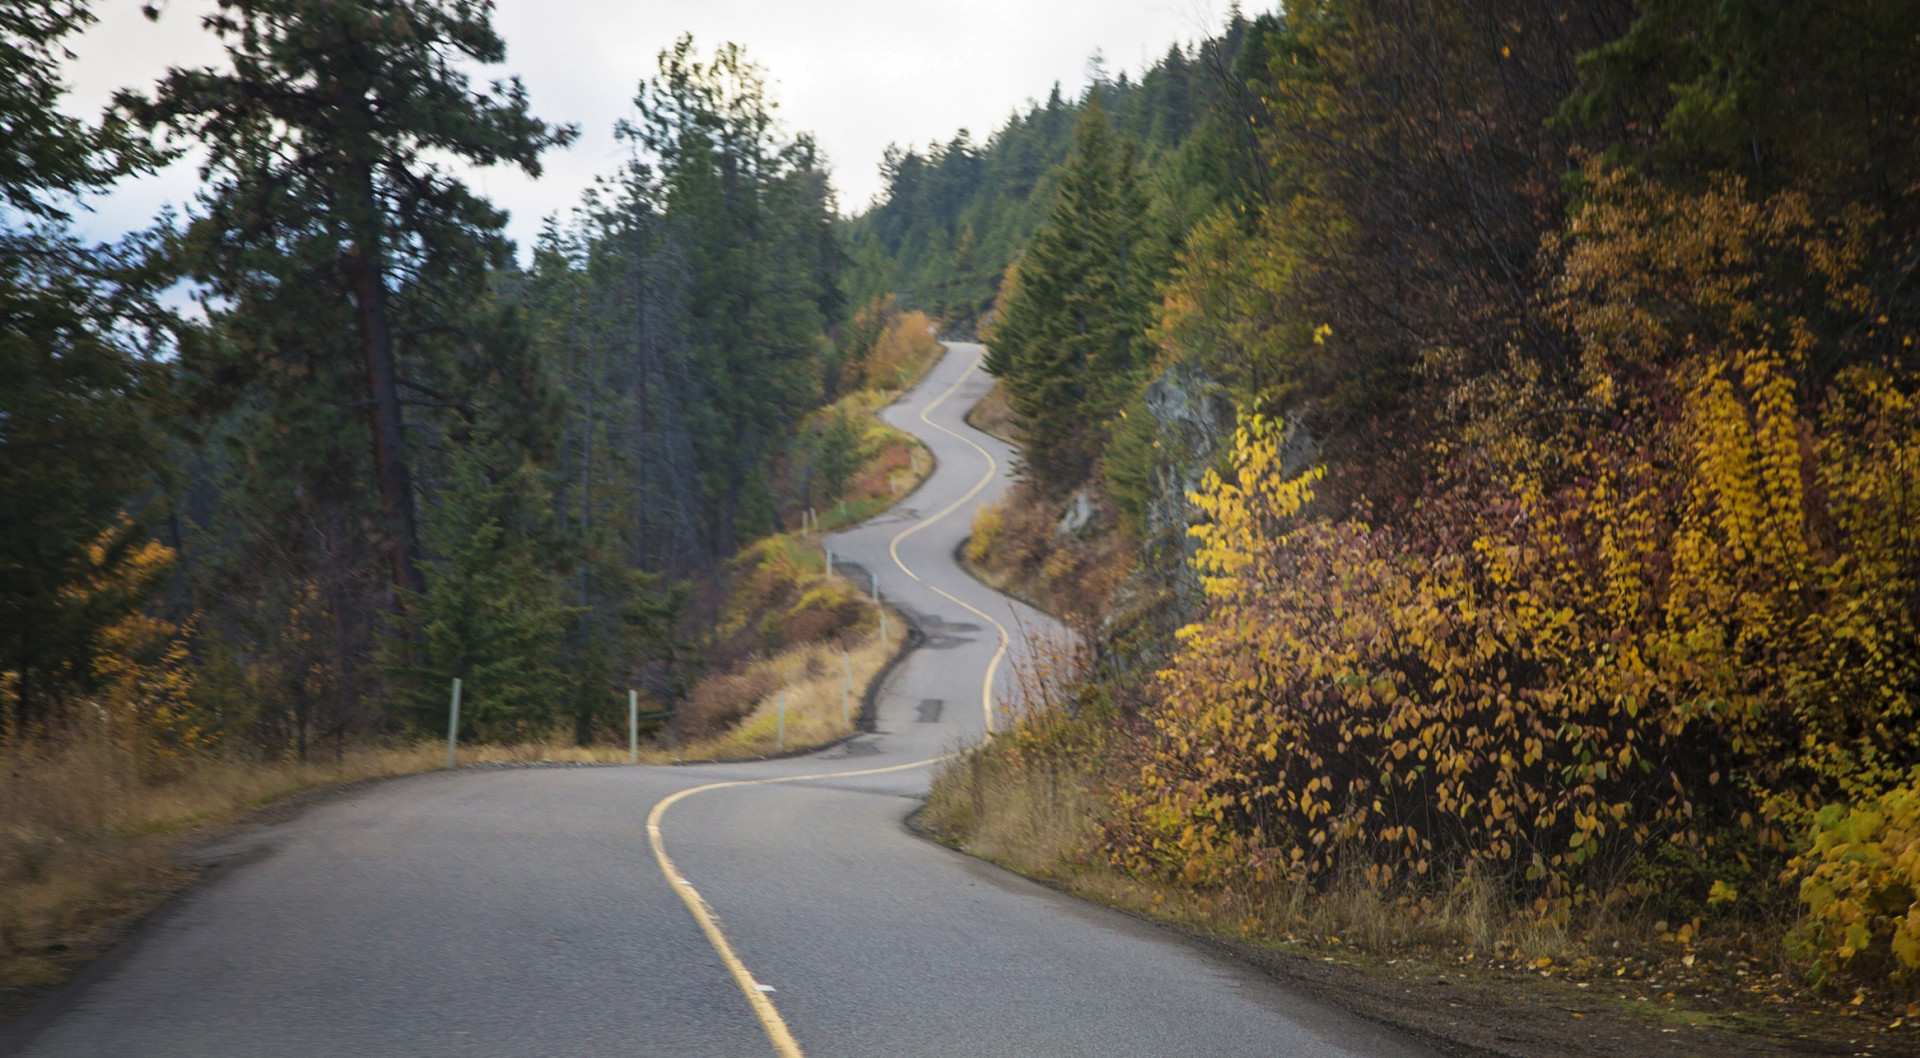 If you can, take Highway 3, a meandering road that cuts through dense forest and is far more scenic. <p><a href="https://www.msn.com/en-us/community/channel/vid-7xx8mnucu55yw63we9va2gwr7uihbxwc68fxqp25x6tg4ftibpra?cvid=94631541bc0f4f89bfd59158d696ad7e">Follow us and access great exclusive content every day</a></p>